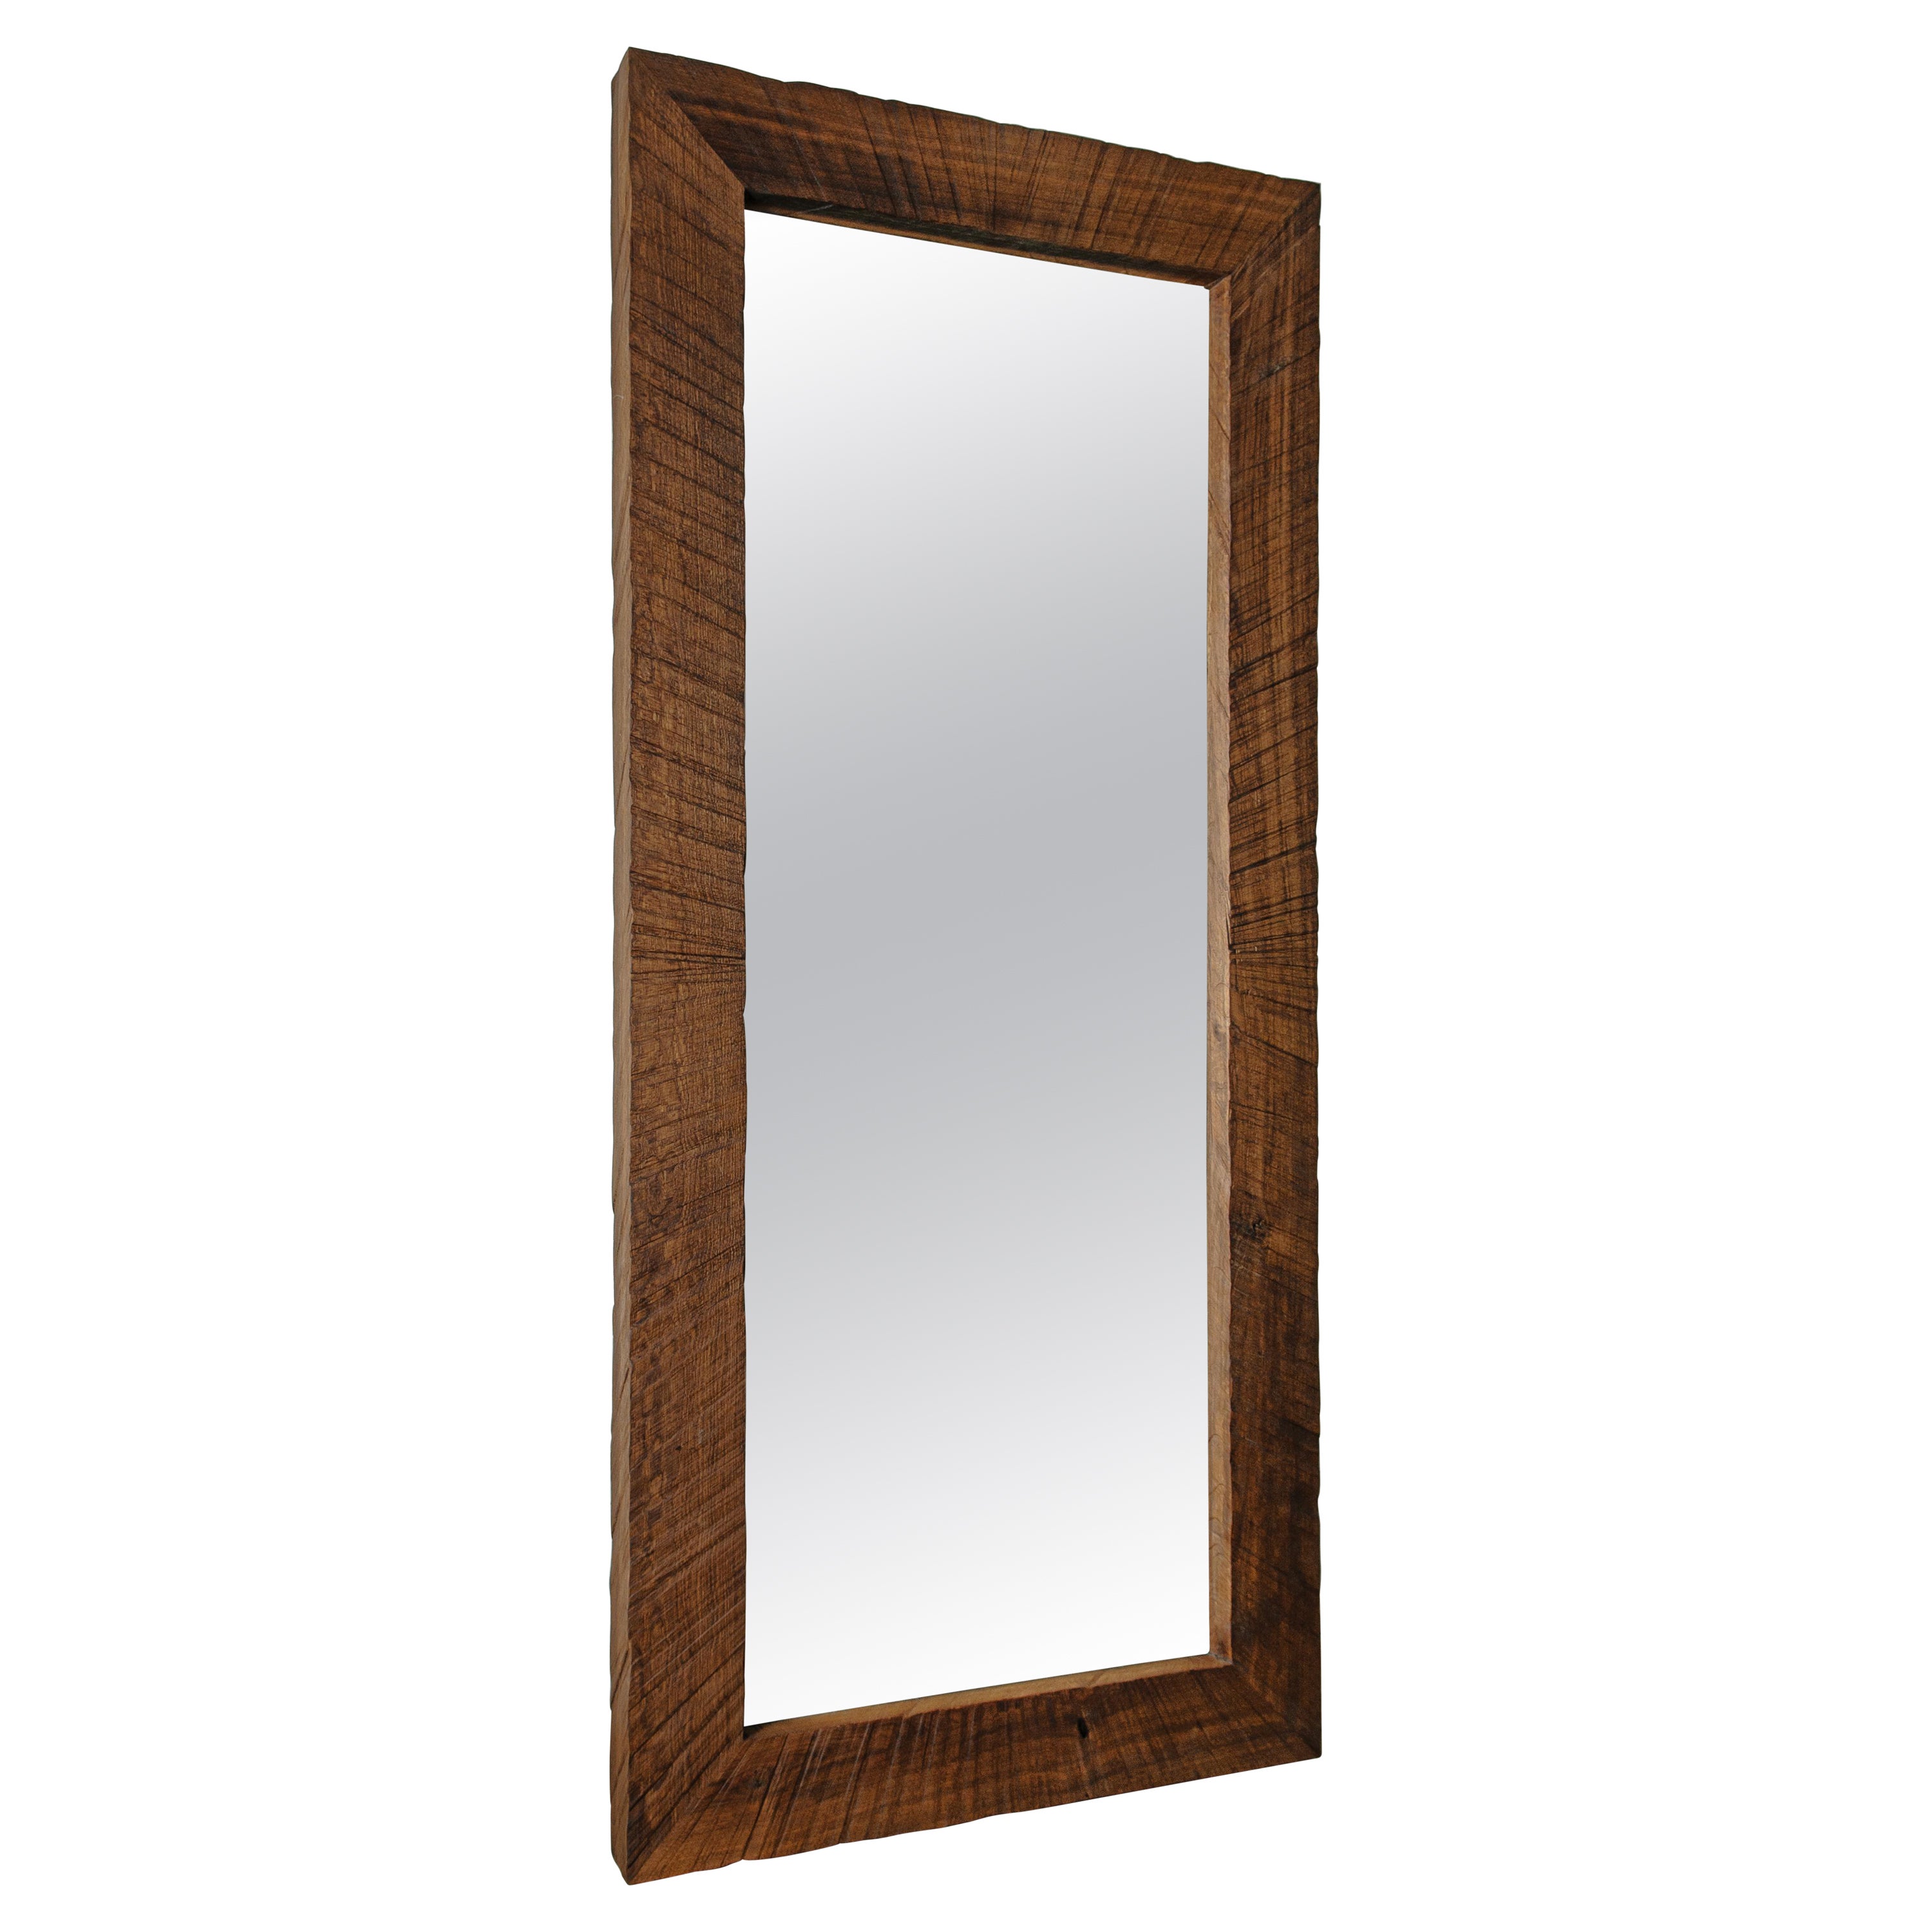 Contemporary Brutalist Style Full Length Mirror in Solid Oak v2